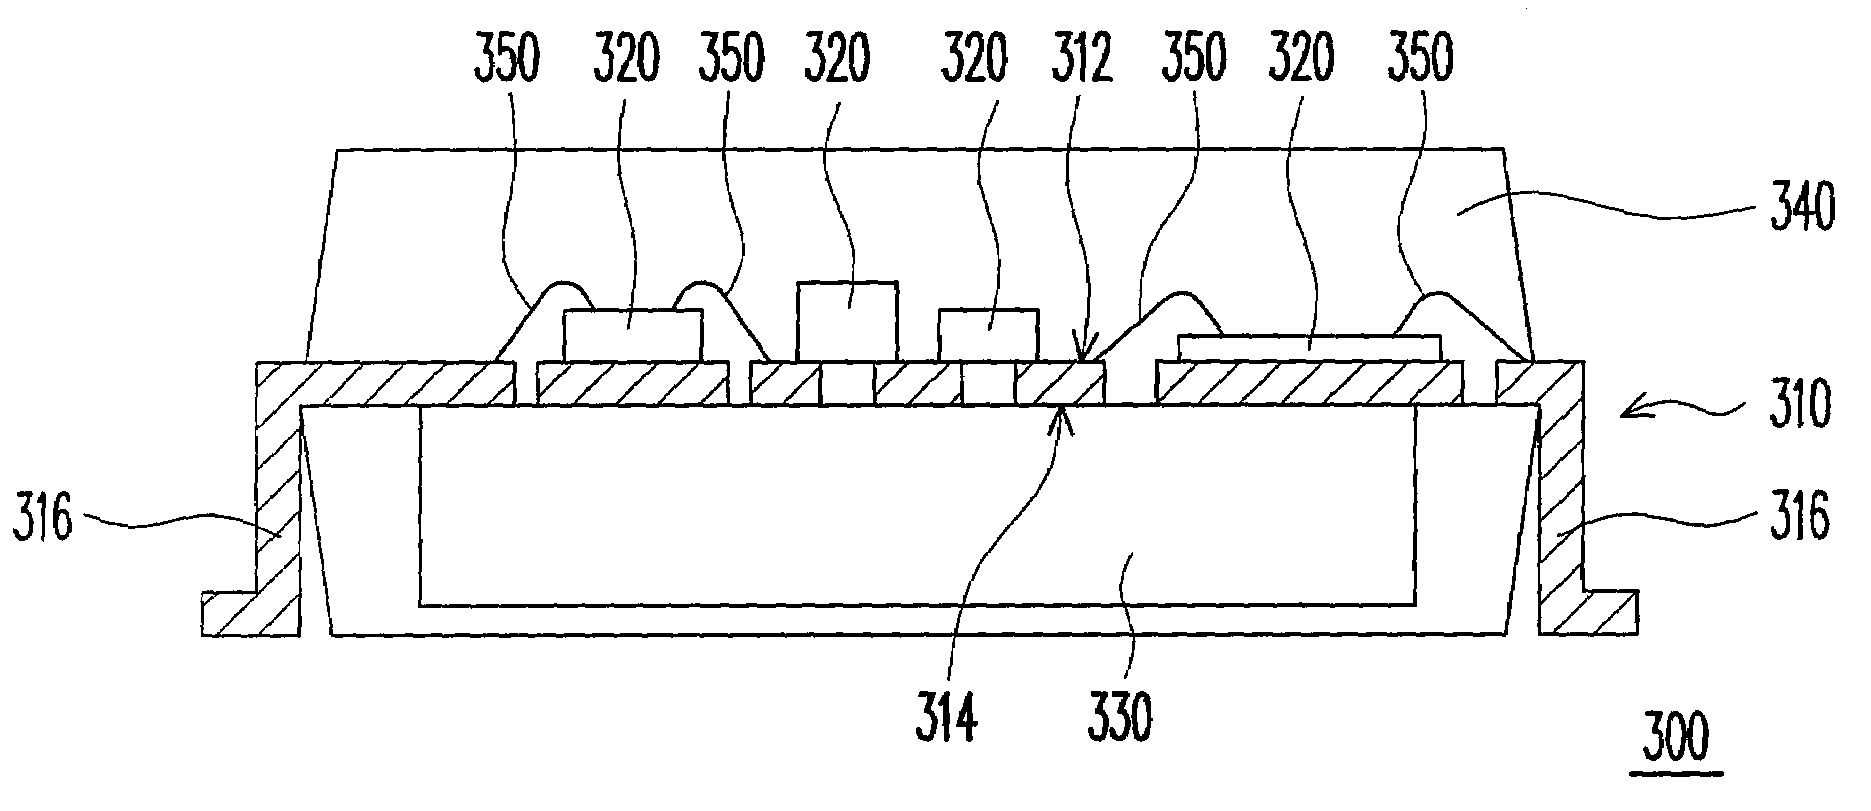 Electronic package structure